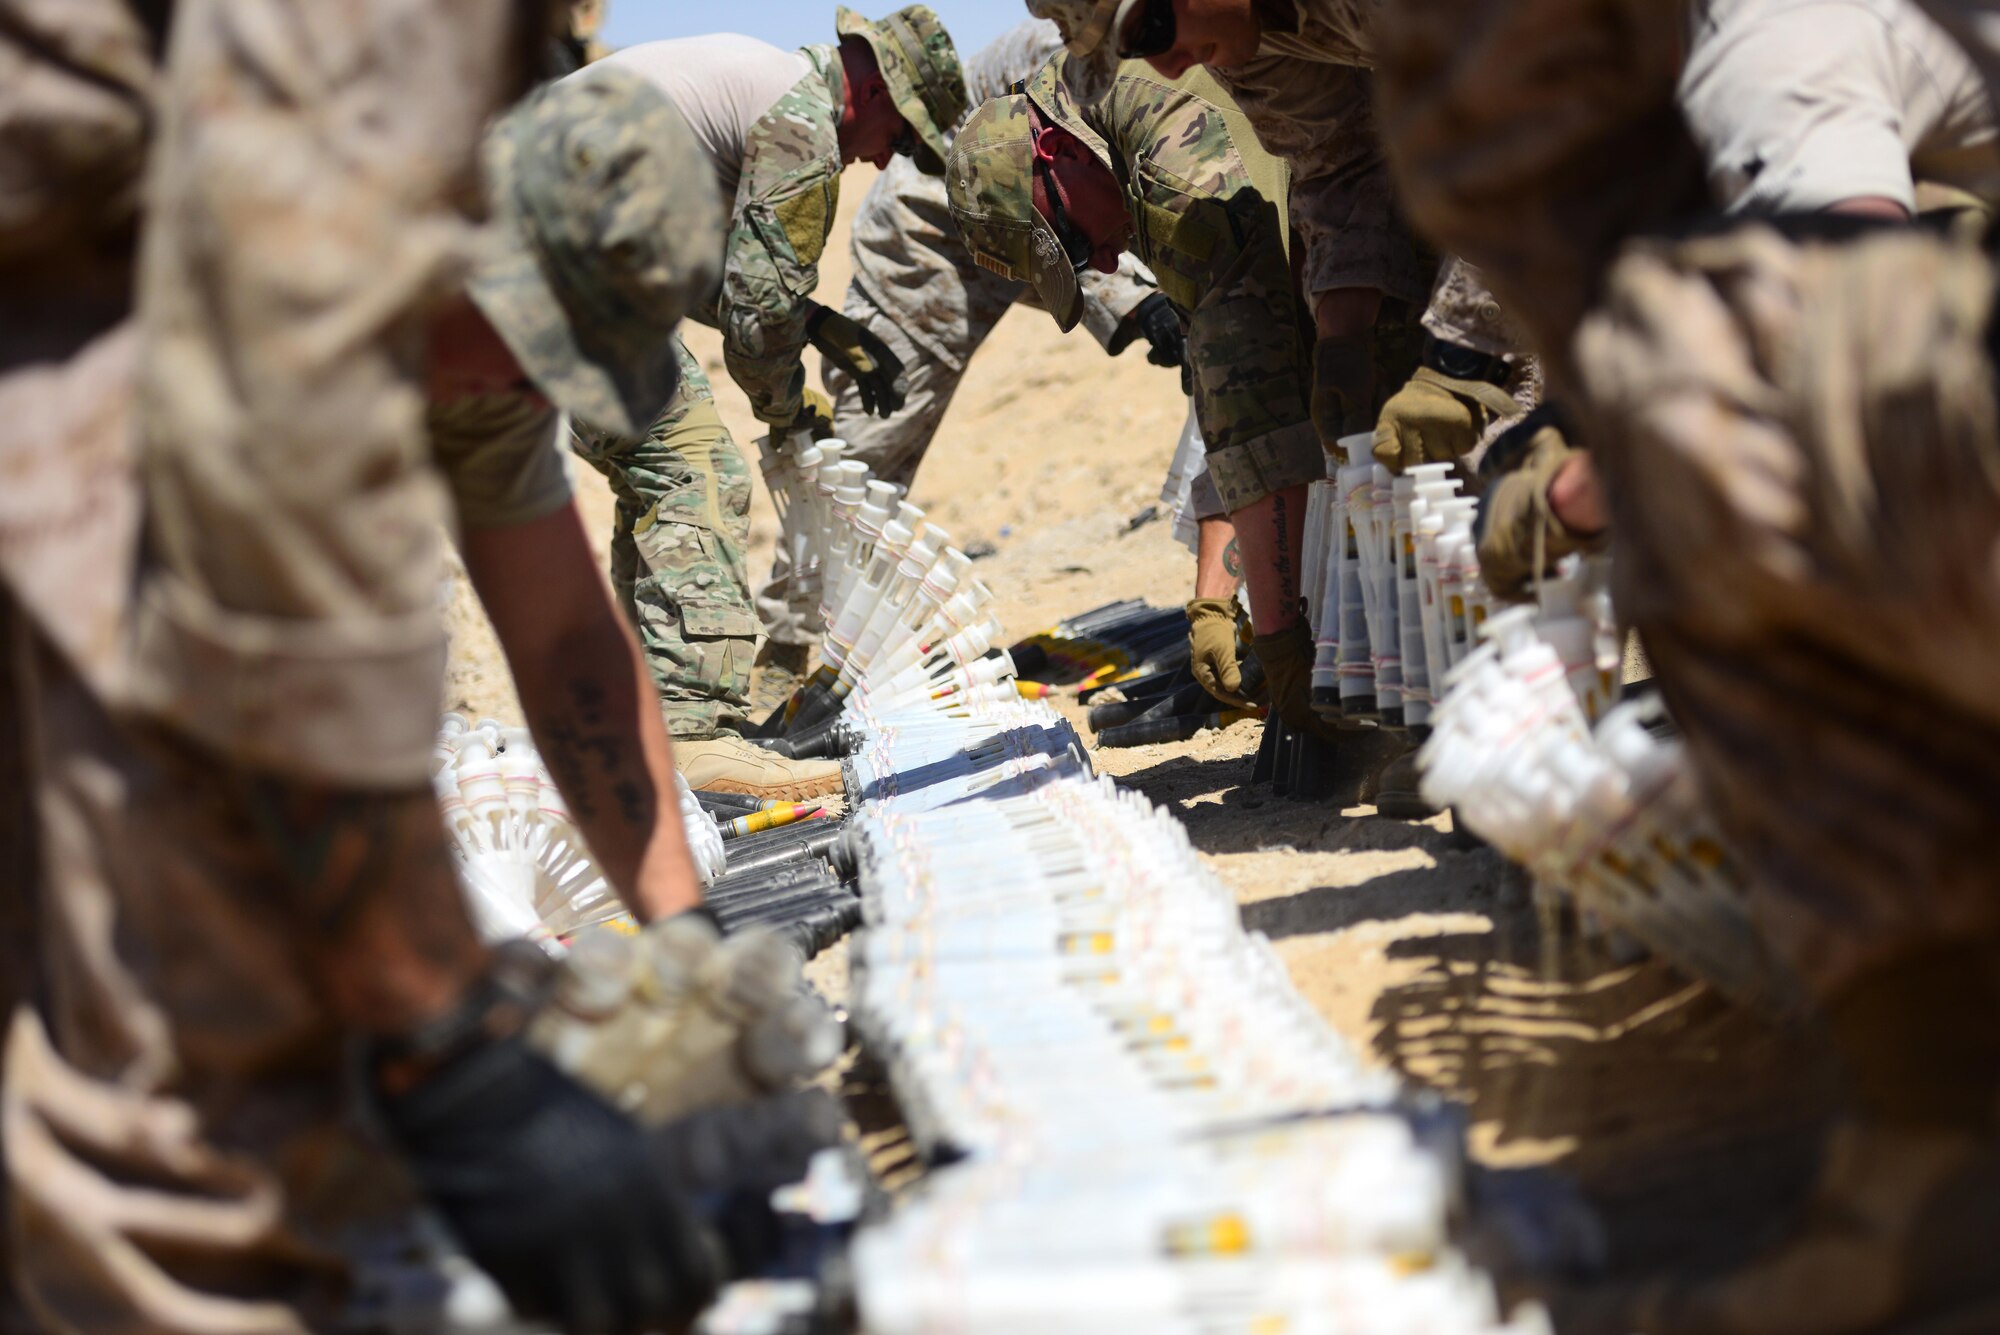 U.S. Air Force, U.S. Marine Corps and coalition partners assigned to the 407th Air Expeditionary Group prepare more than 5,000 pieces of unserviceable 30mm rounds and aircraft decoy flares for a coordinated detonation at the bomb range in Southwest Asia on June 6, 2017. Explosive ordnance disposal technicians are charged with locating, identifying, disarming, neutralizing, recovering, and disposing of hazardous explosives; conventional, chemical, biological, incendiary, and nuclear ordnance; and criminal or terrorist devices. (U.S. Air Force photo by Tech Sgt. Andy M. Kin)